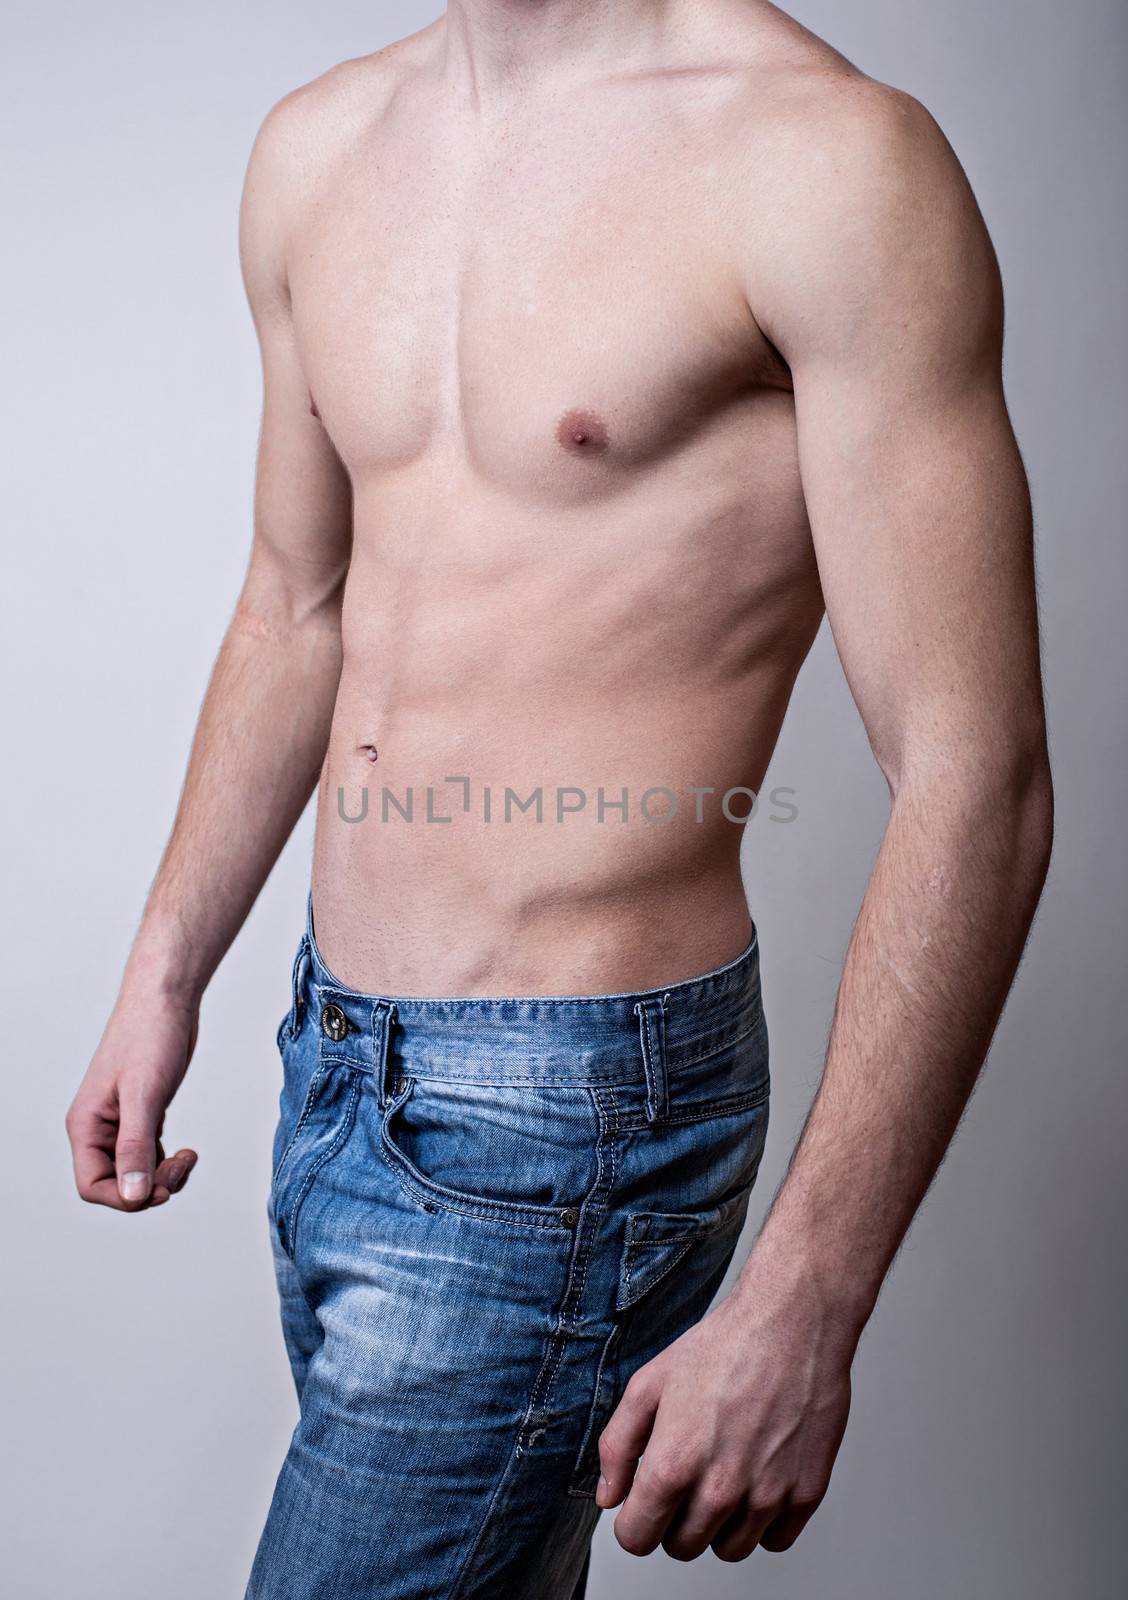 Handsome muscular young man. Shot in a studio.